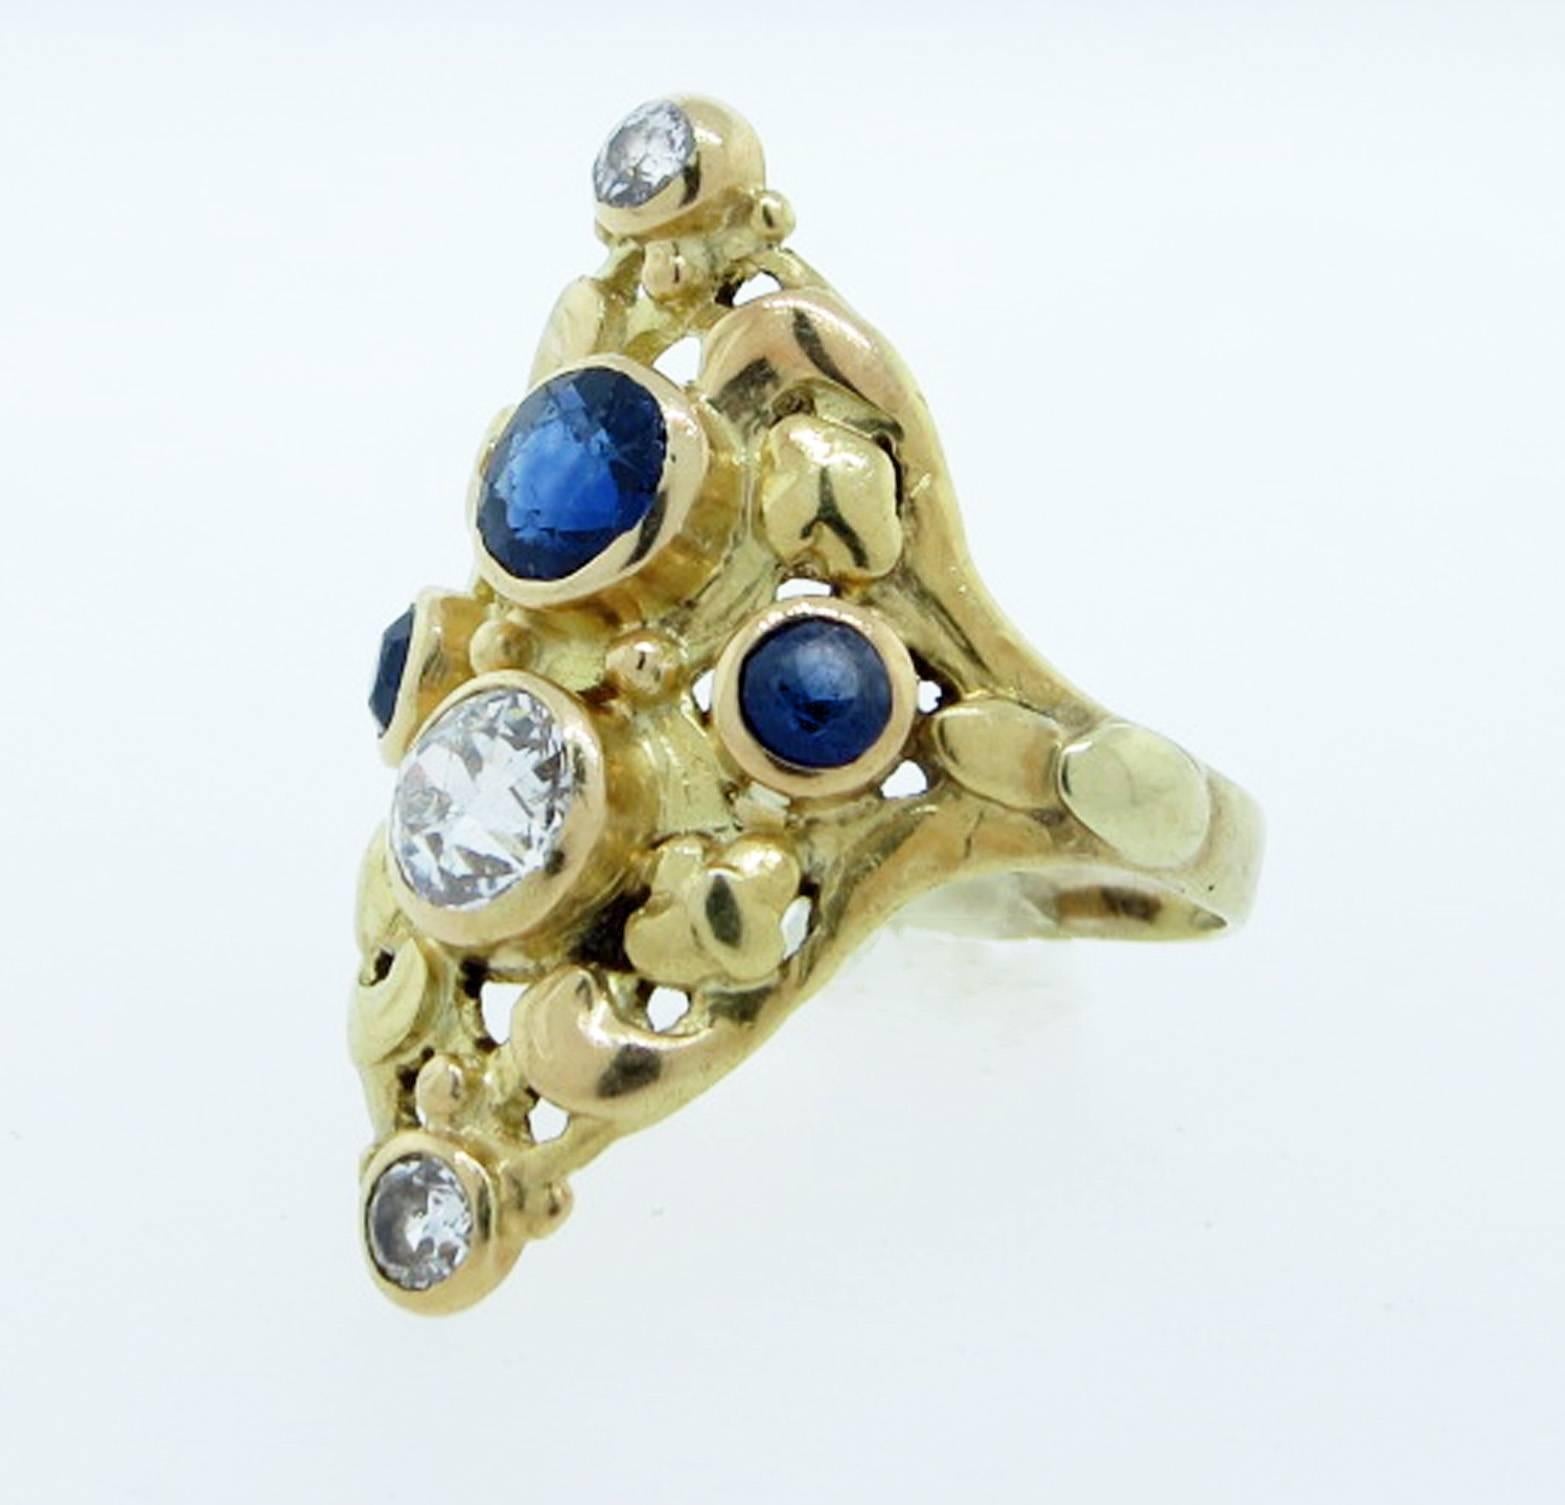 Ladies handmade 14kt. yellow gold Art Nouveau ring circa 1910. The large center old mine cut diamond weighing approx .50cts. The large old cut fine blue natural sapphire weighing approx .60cts. The side smaller diamonds total approx  .12cts , the